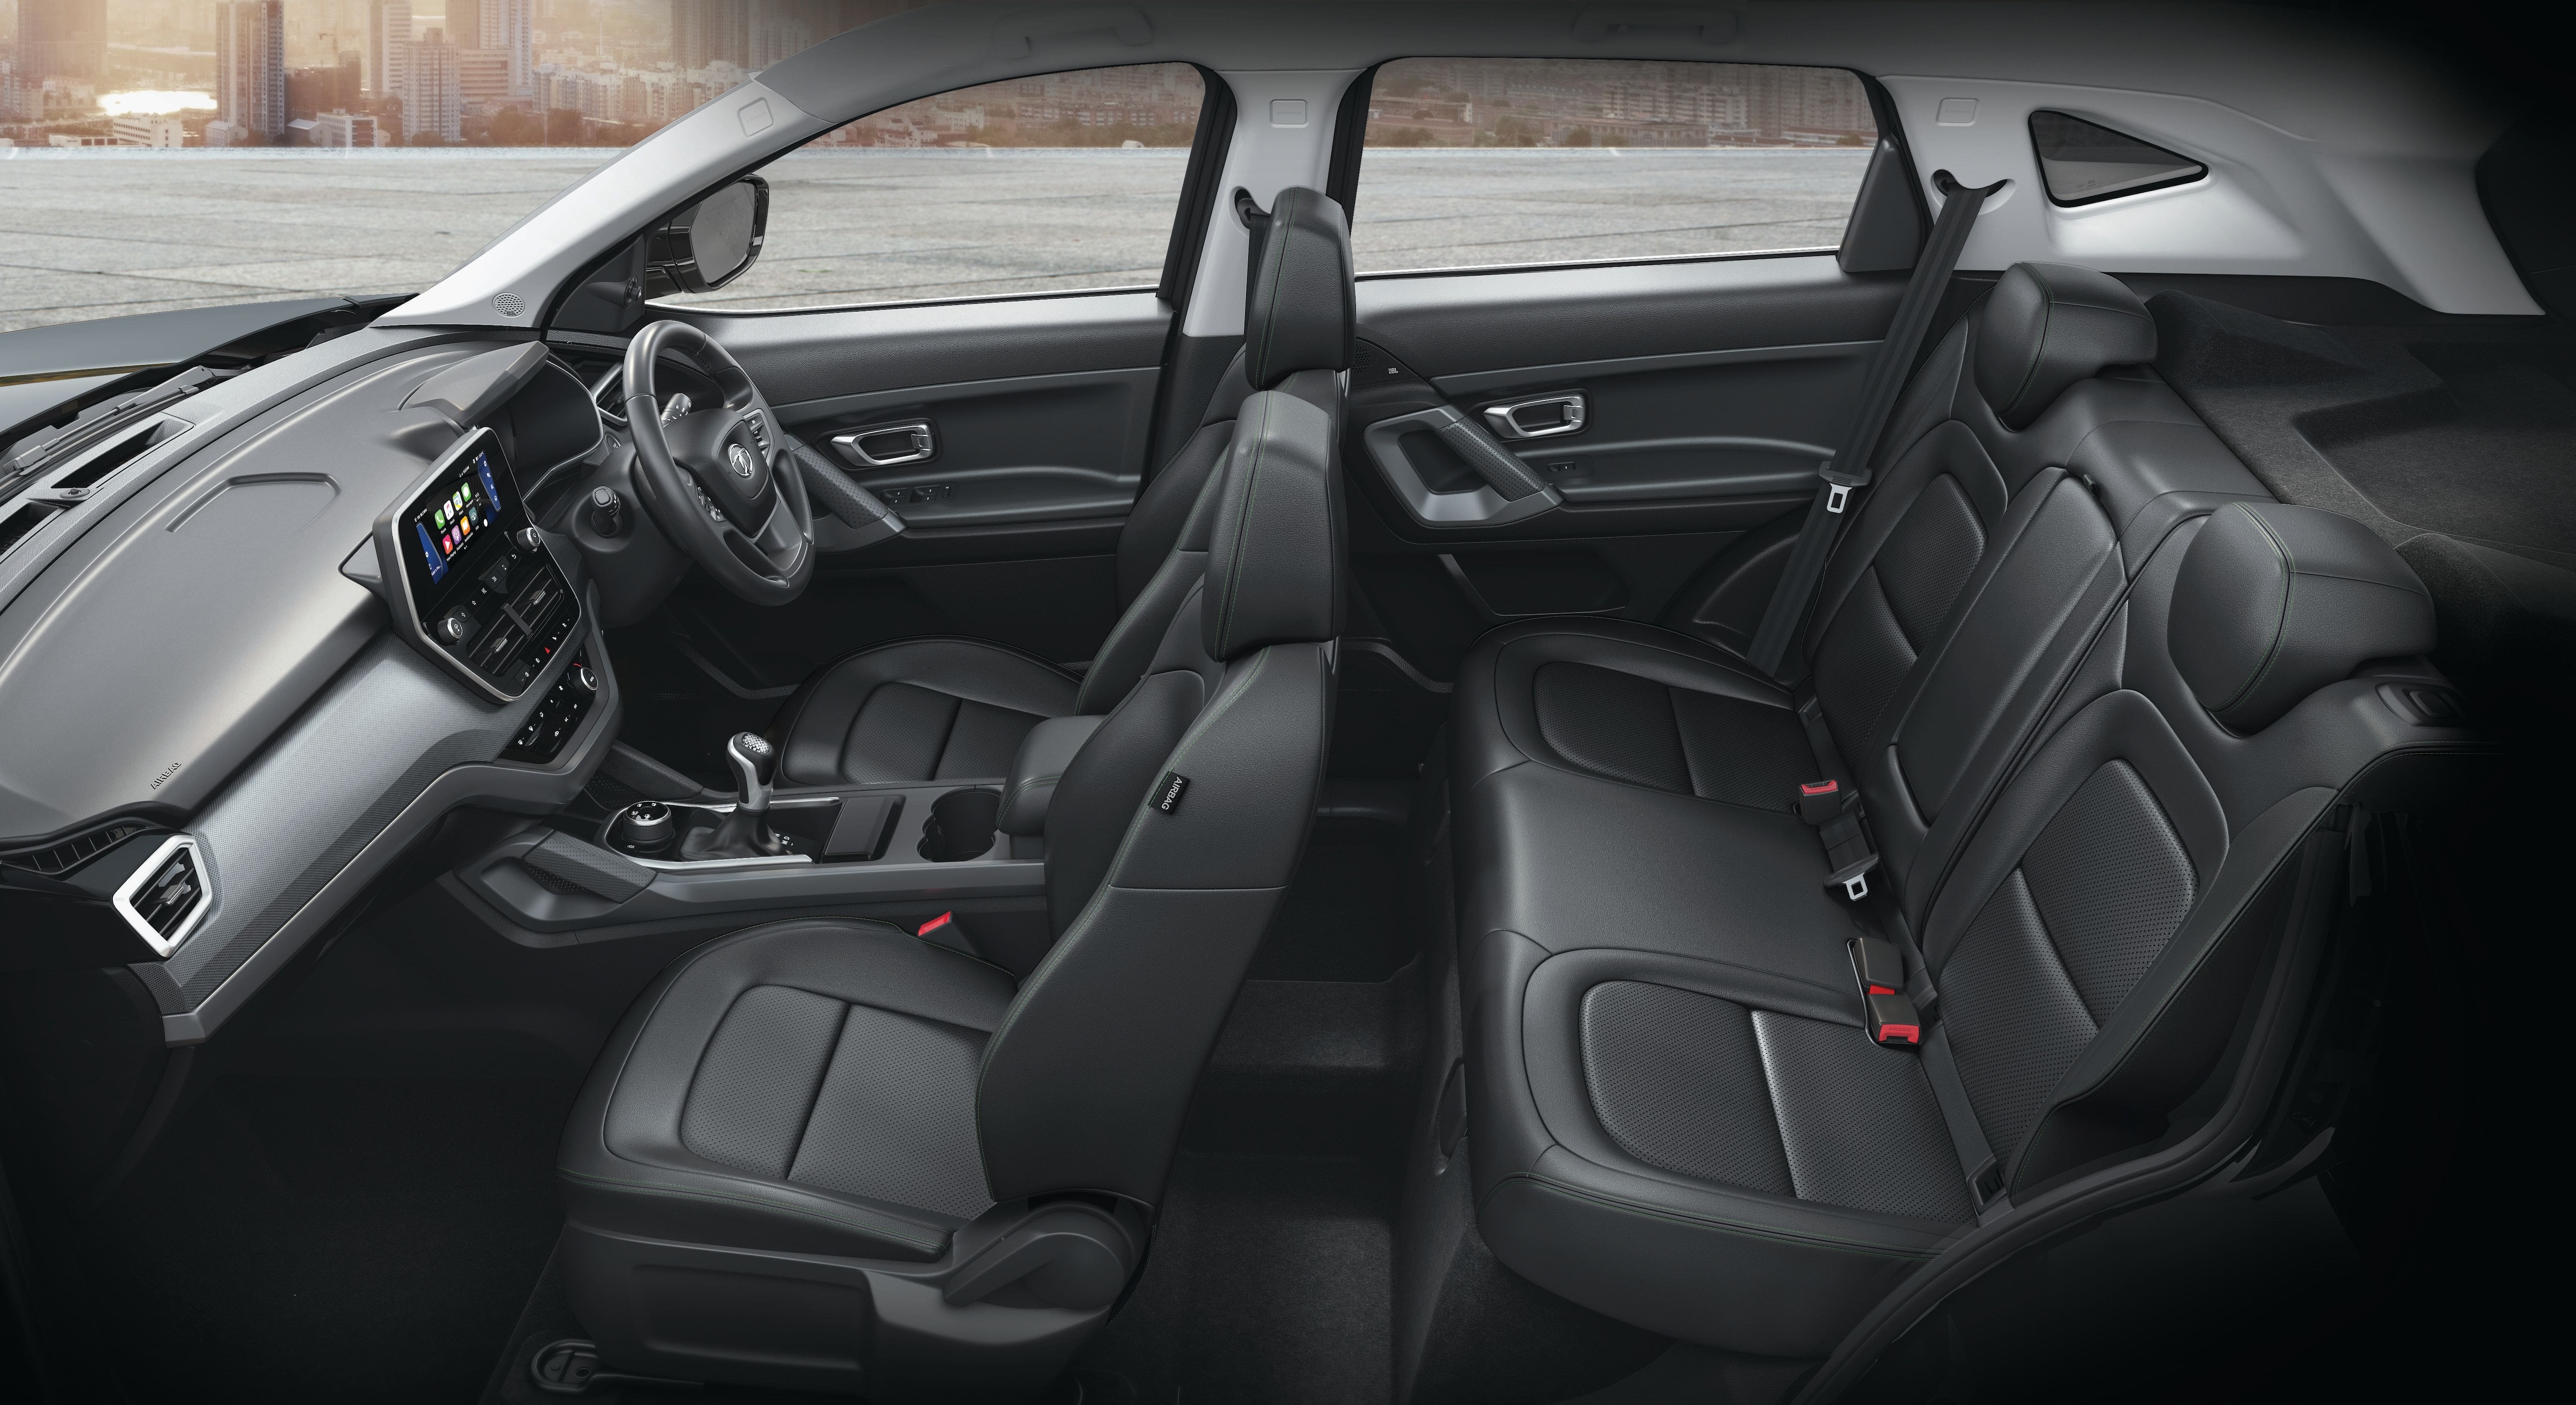 A view of the cabin space in the Tata Harrier CAMO edition.